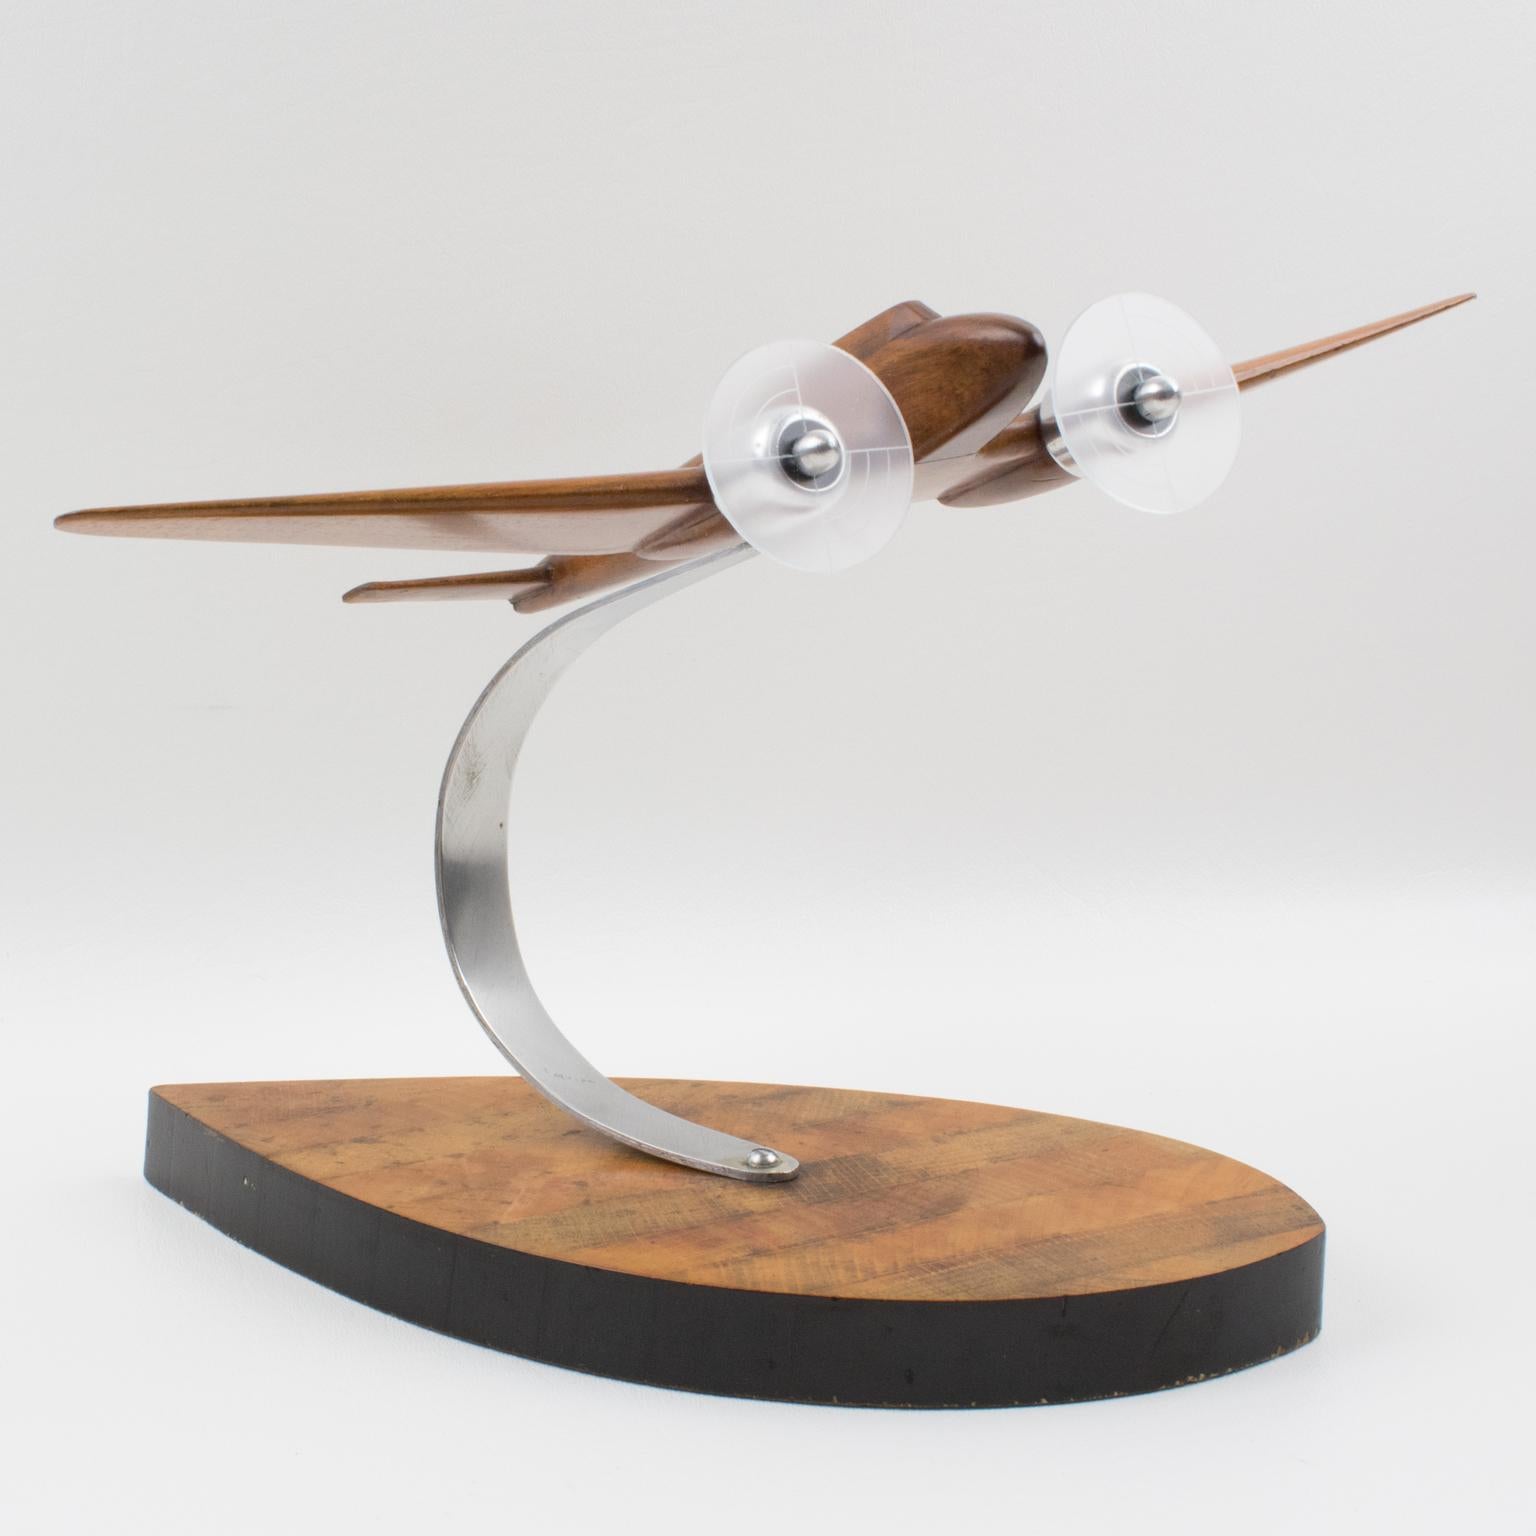 Handsome French Art Deco wood and aluminum airplane model mounted on a stylized wood plinth. This nice 1940s model airplane is made with varnish wood and aluminum and Lucite for the two propellers. Standing on a geometric wood plinth with an